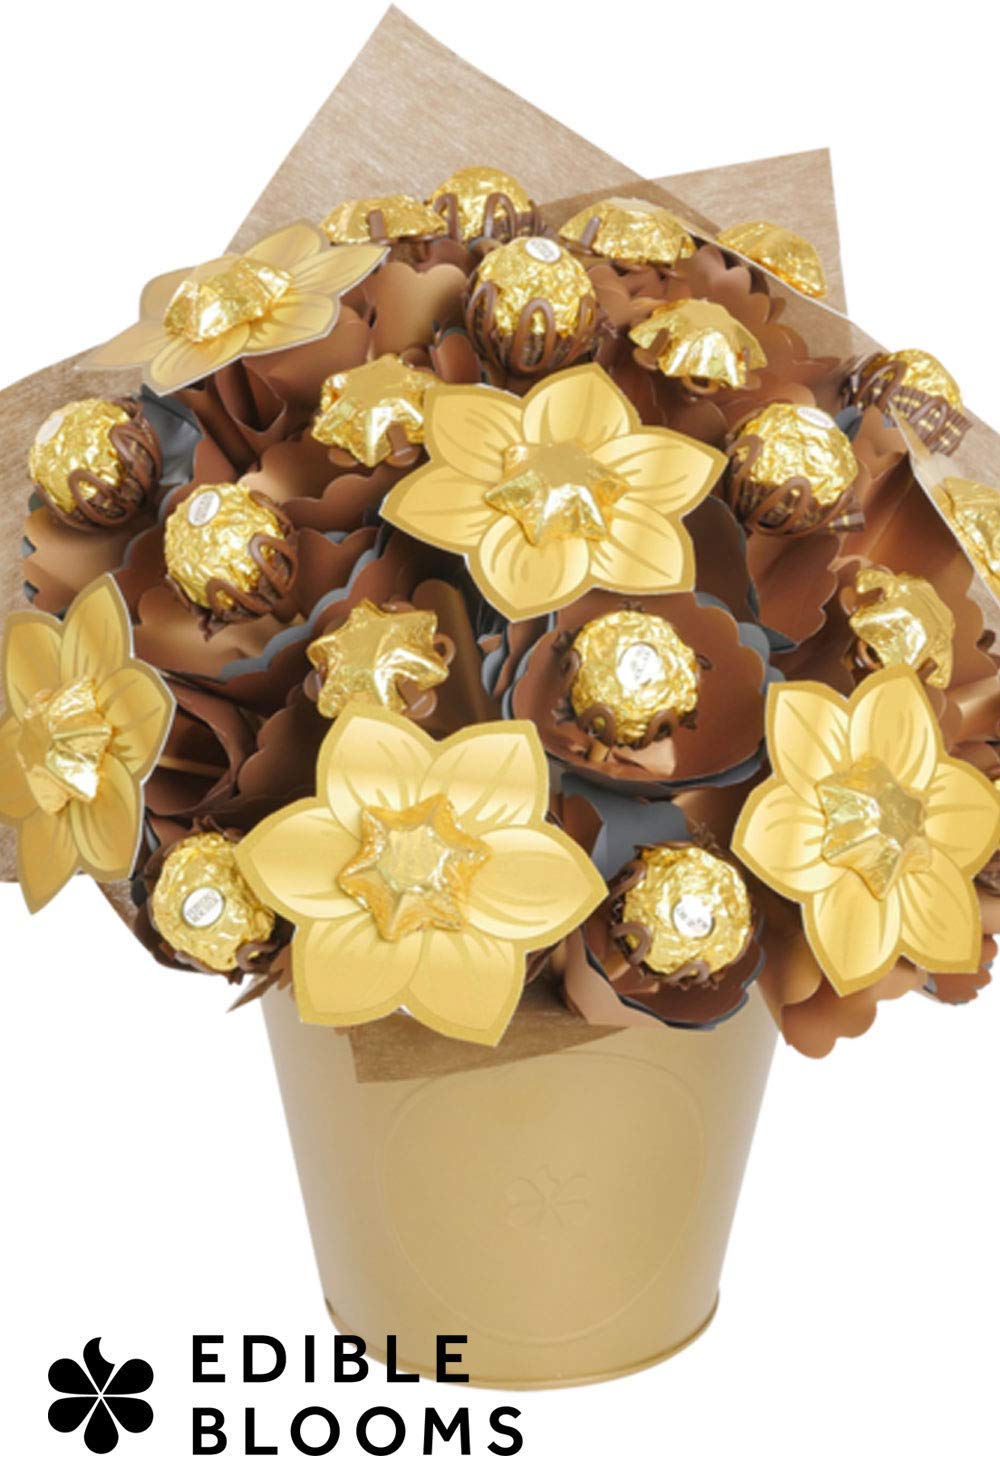 Chocolate Bouquet Gifts - Chocolate Gift Set